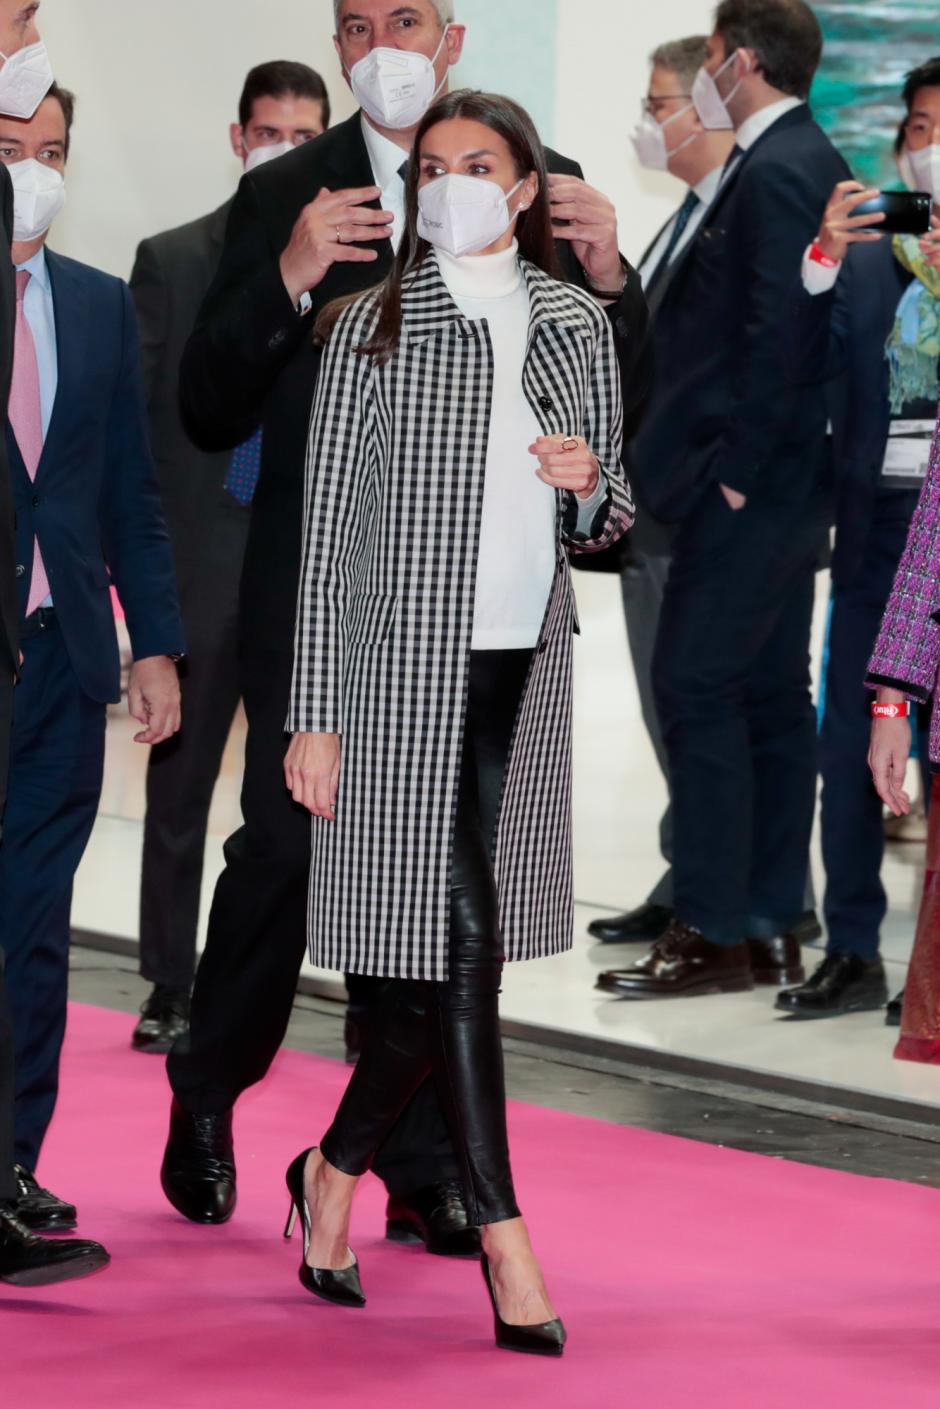 Spanish Queen Letizia Ortiz during 42 edition of FITUR: International Tourist Fair in Madrid on Wednesday, 19  January 2022.